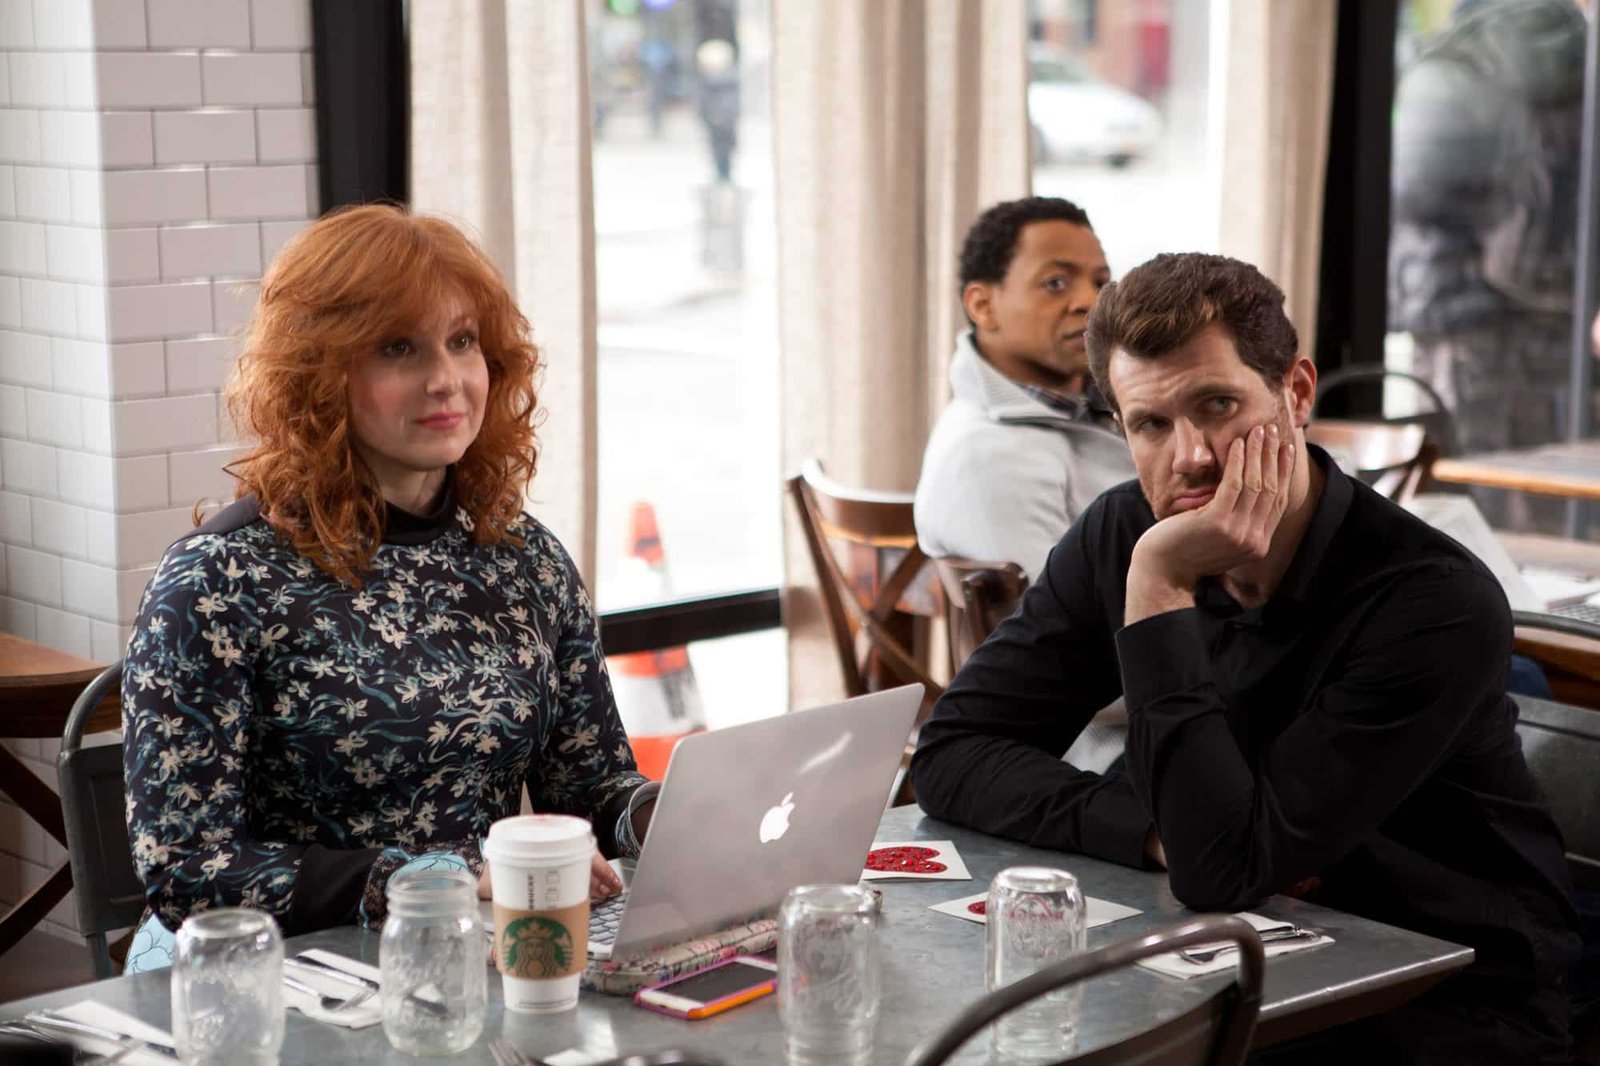 Shows Like Difficult People Hulu